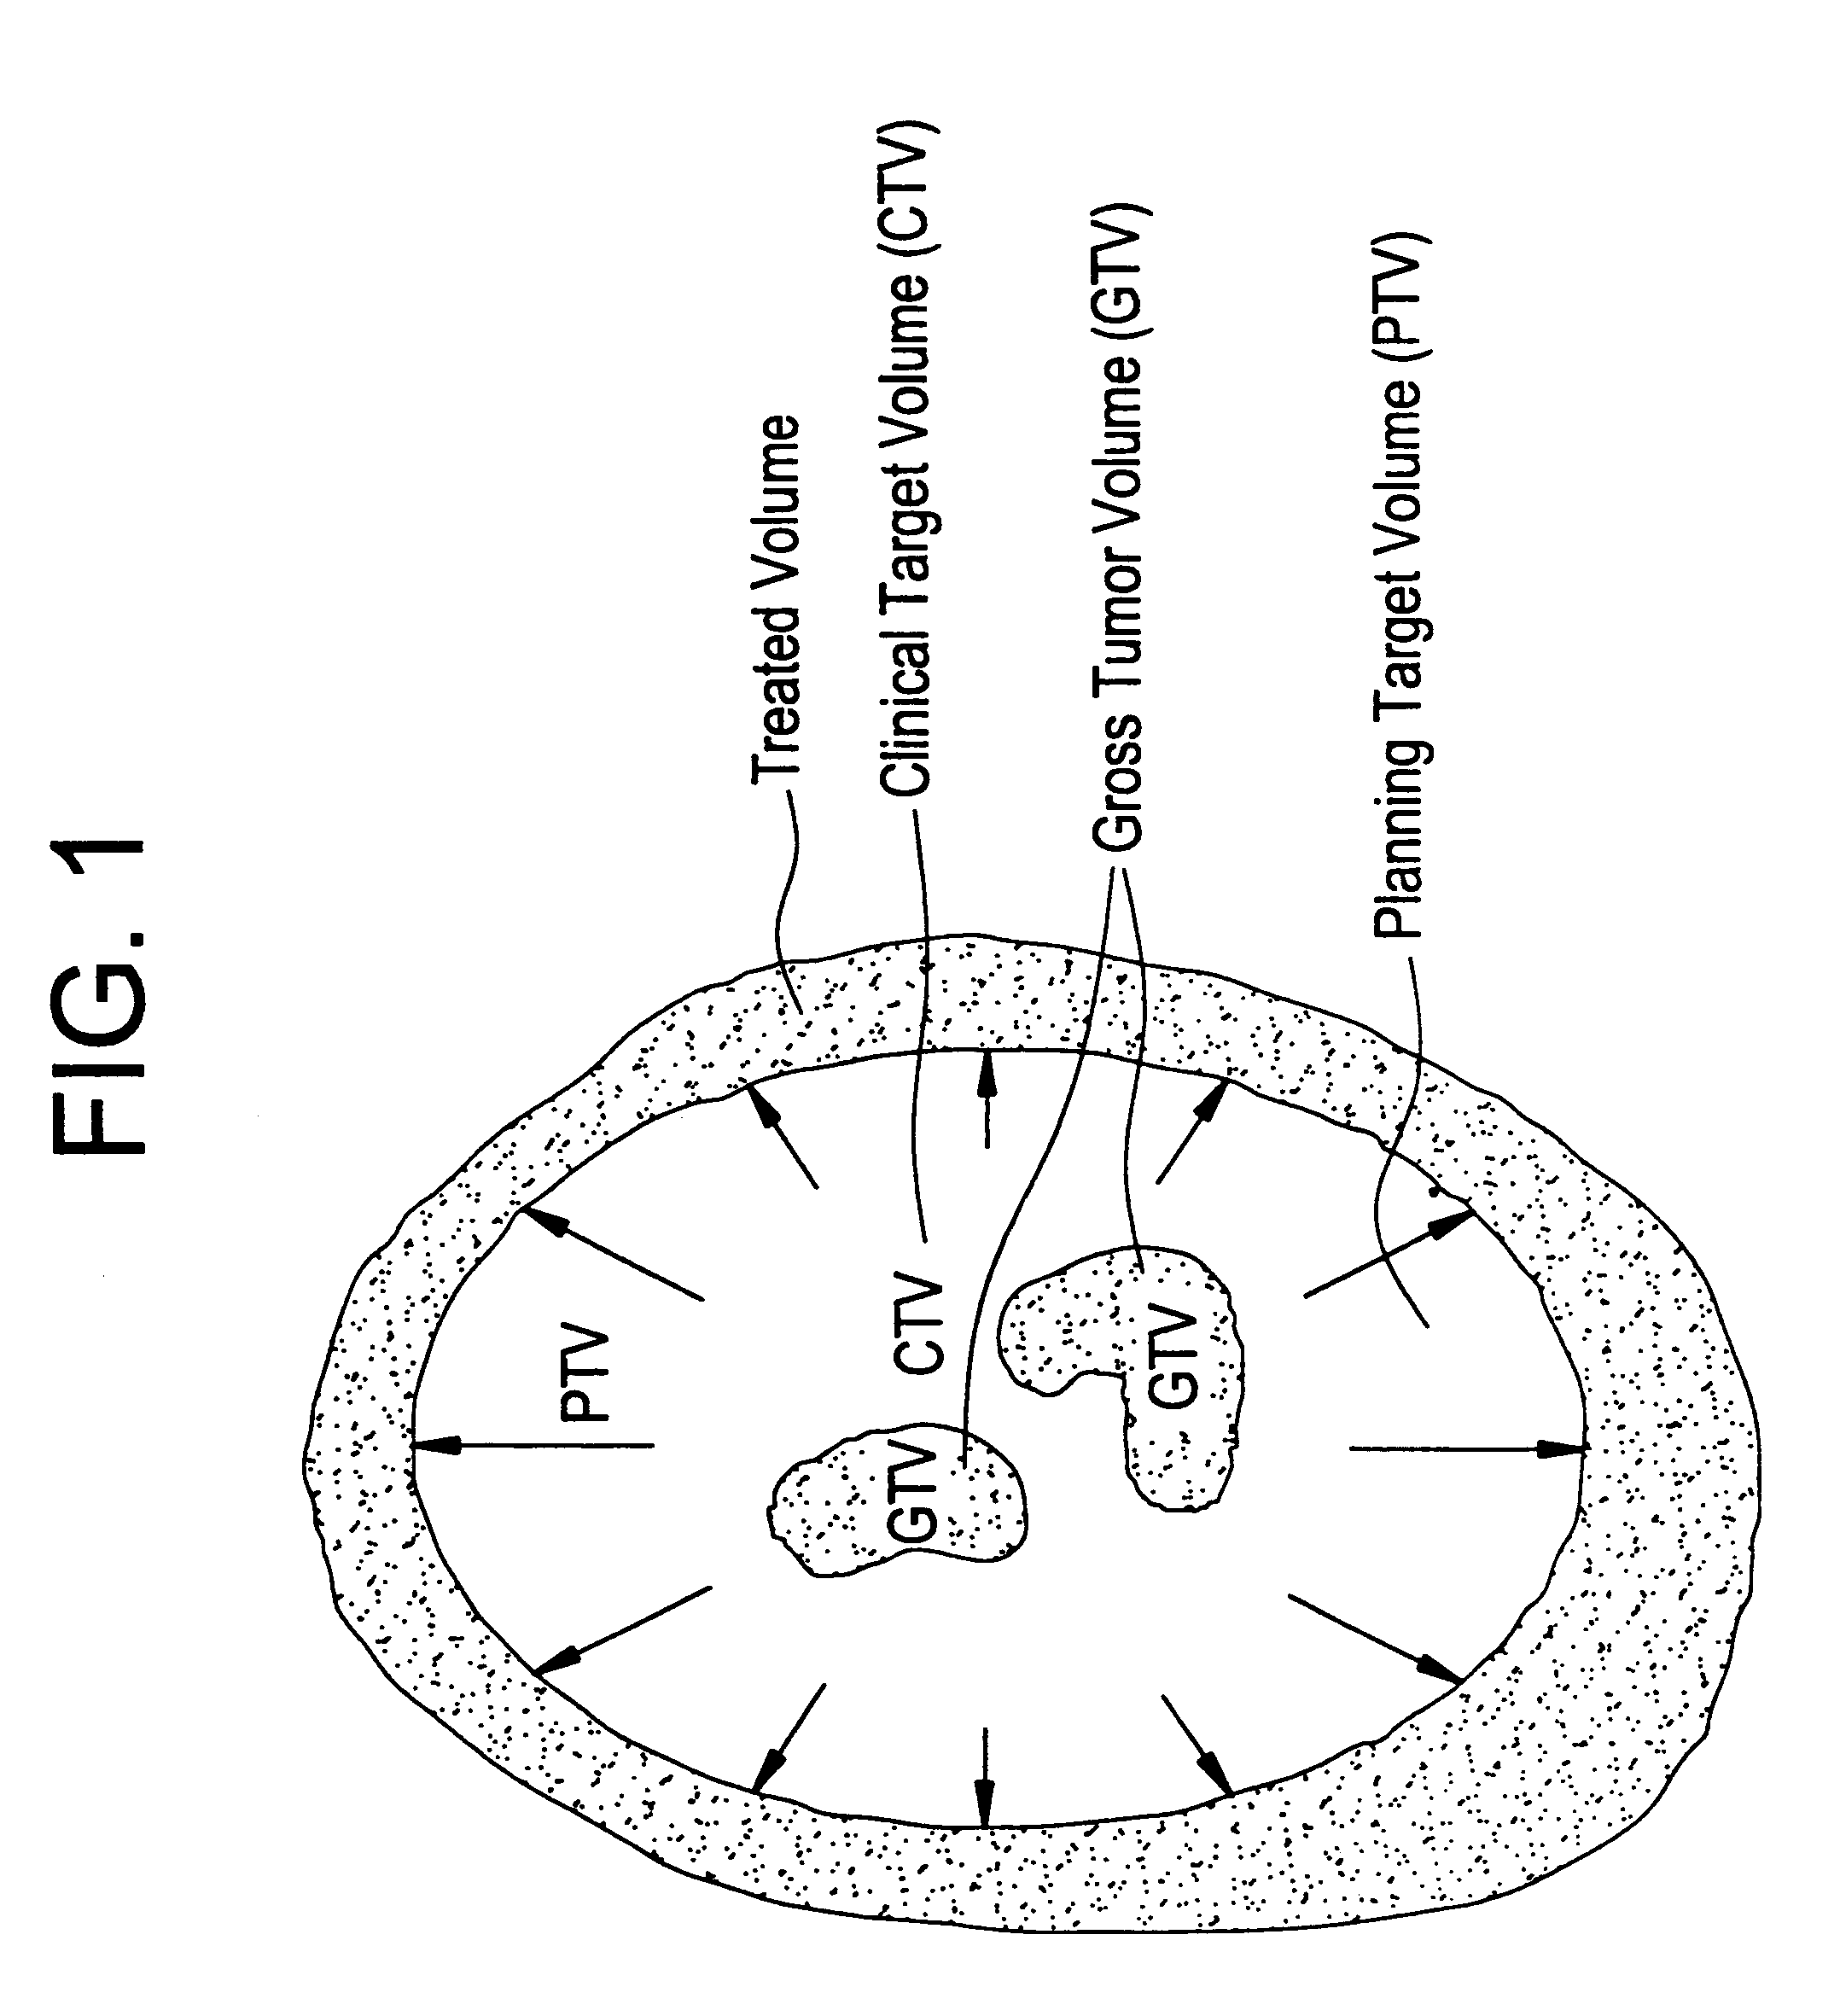 Respiration responsive gating means and apparatus and methods using the same